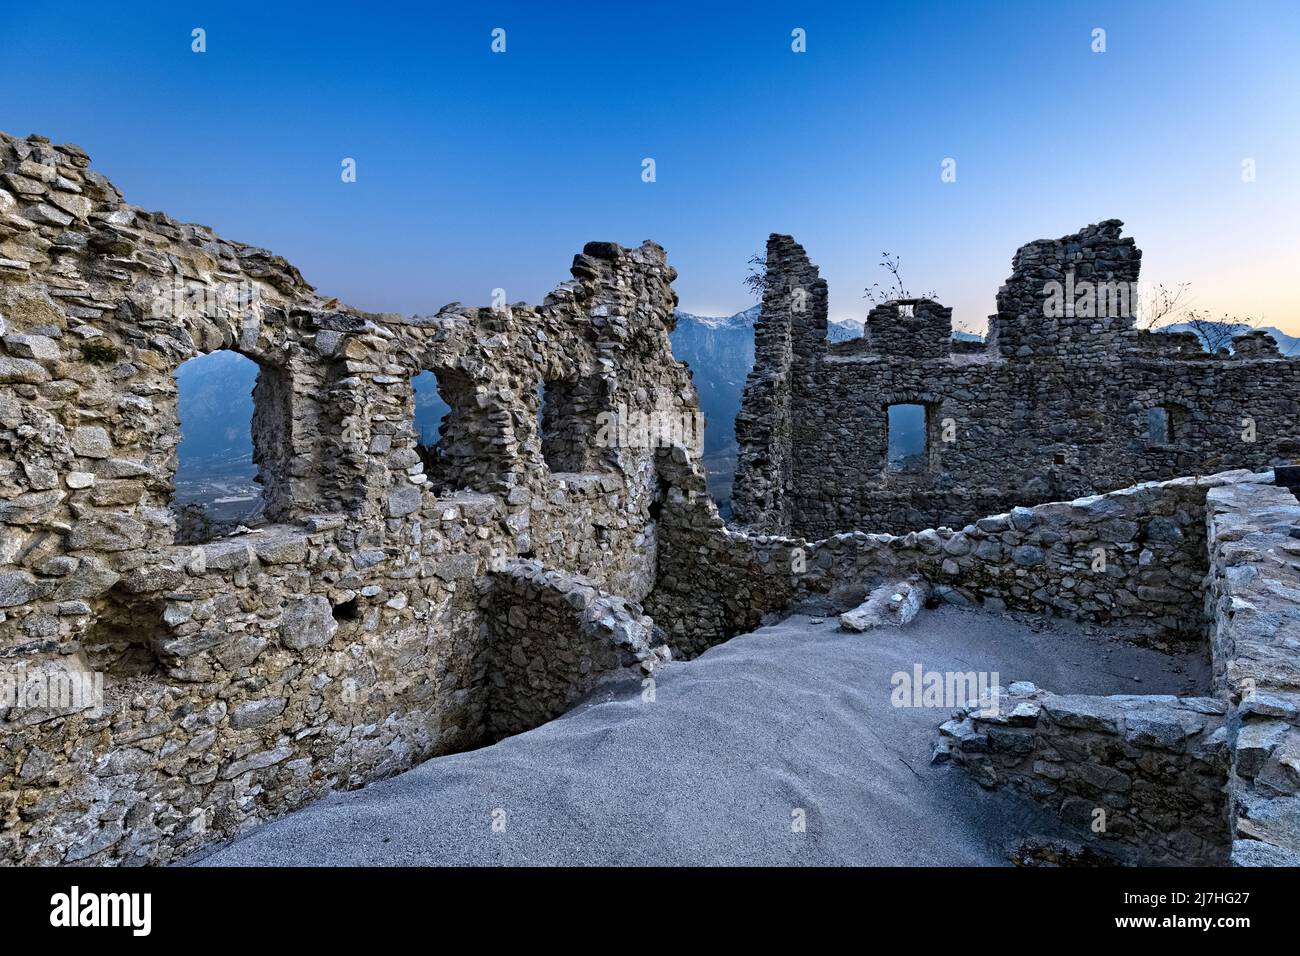 Ruins of the medieval wall with loopholes of Castellalto castle. Telve, Trento province, Trentino Alto-Adige, Italy, Europe. Stock Photo